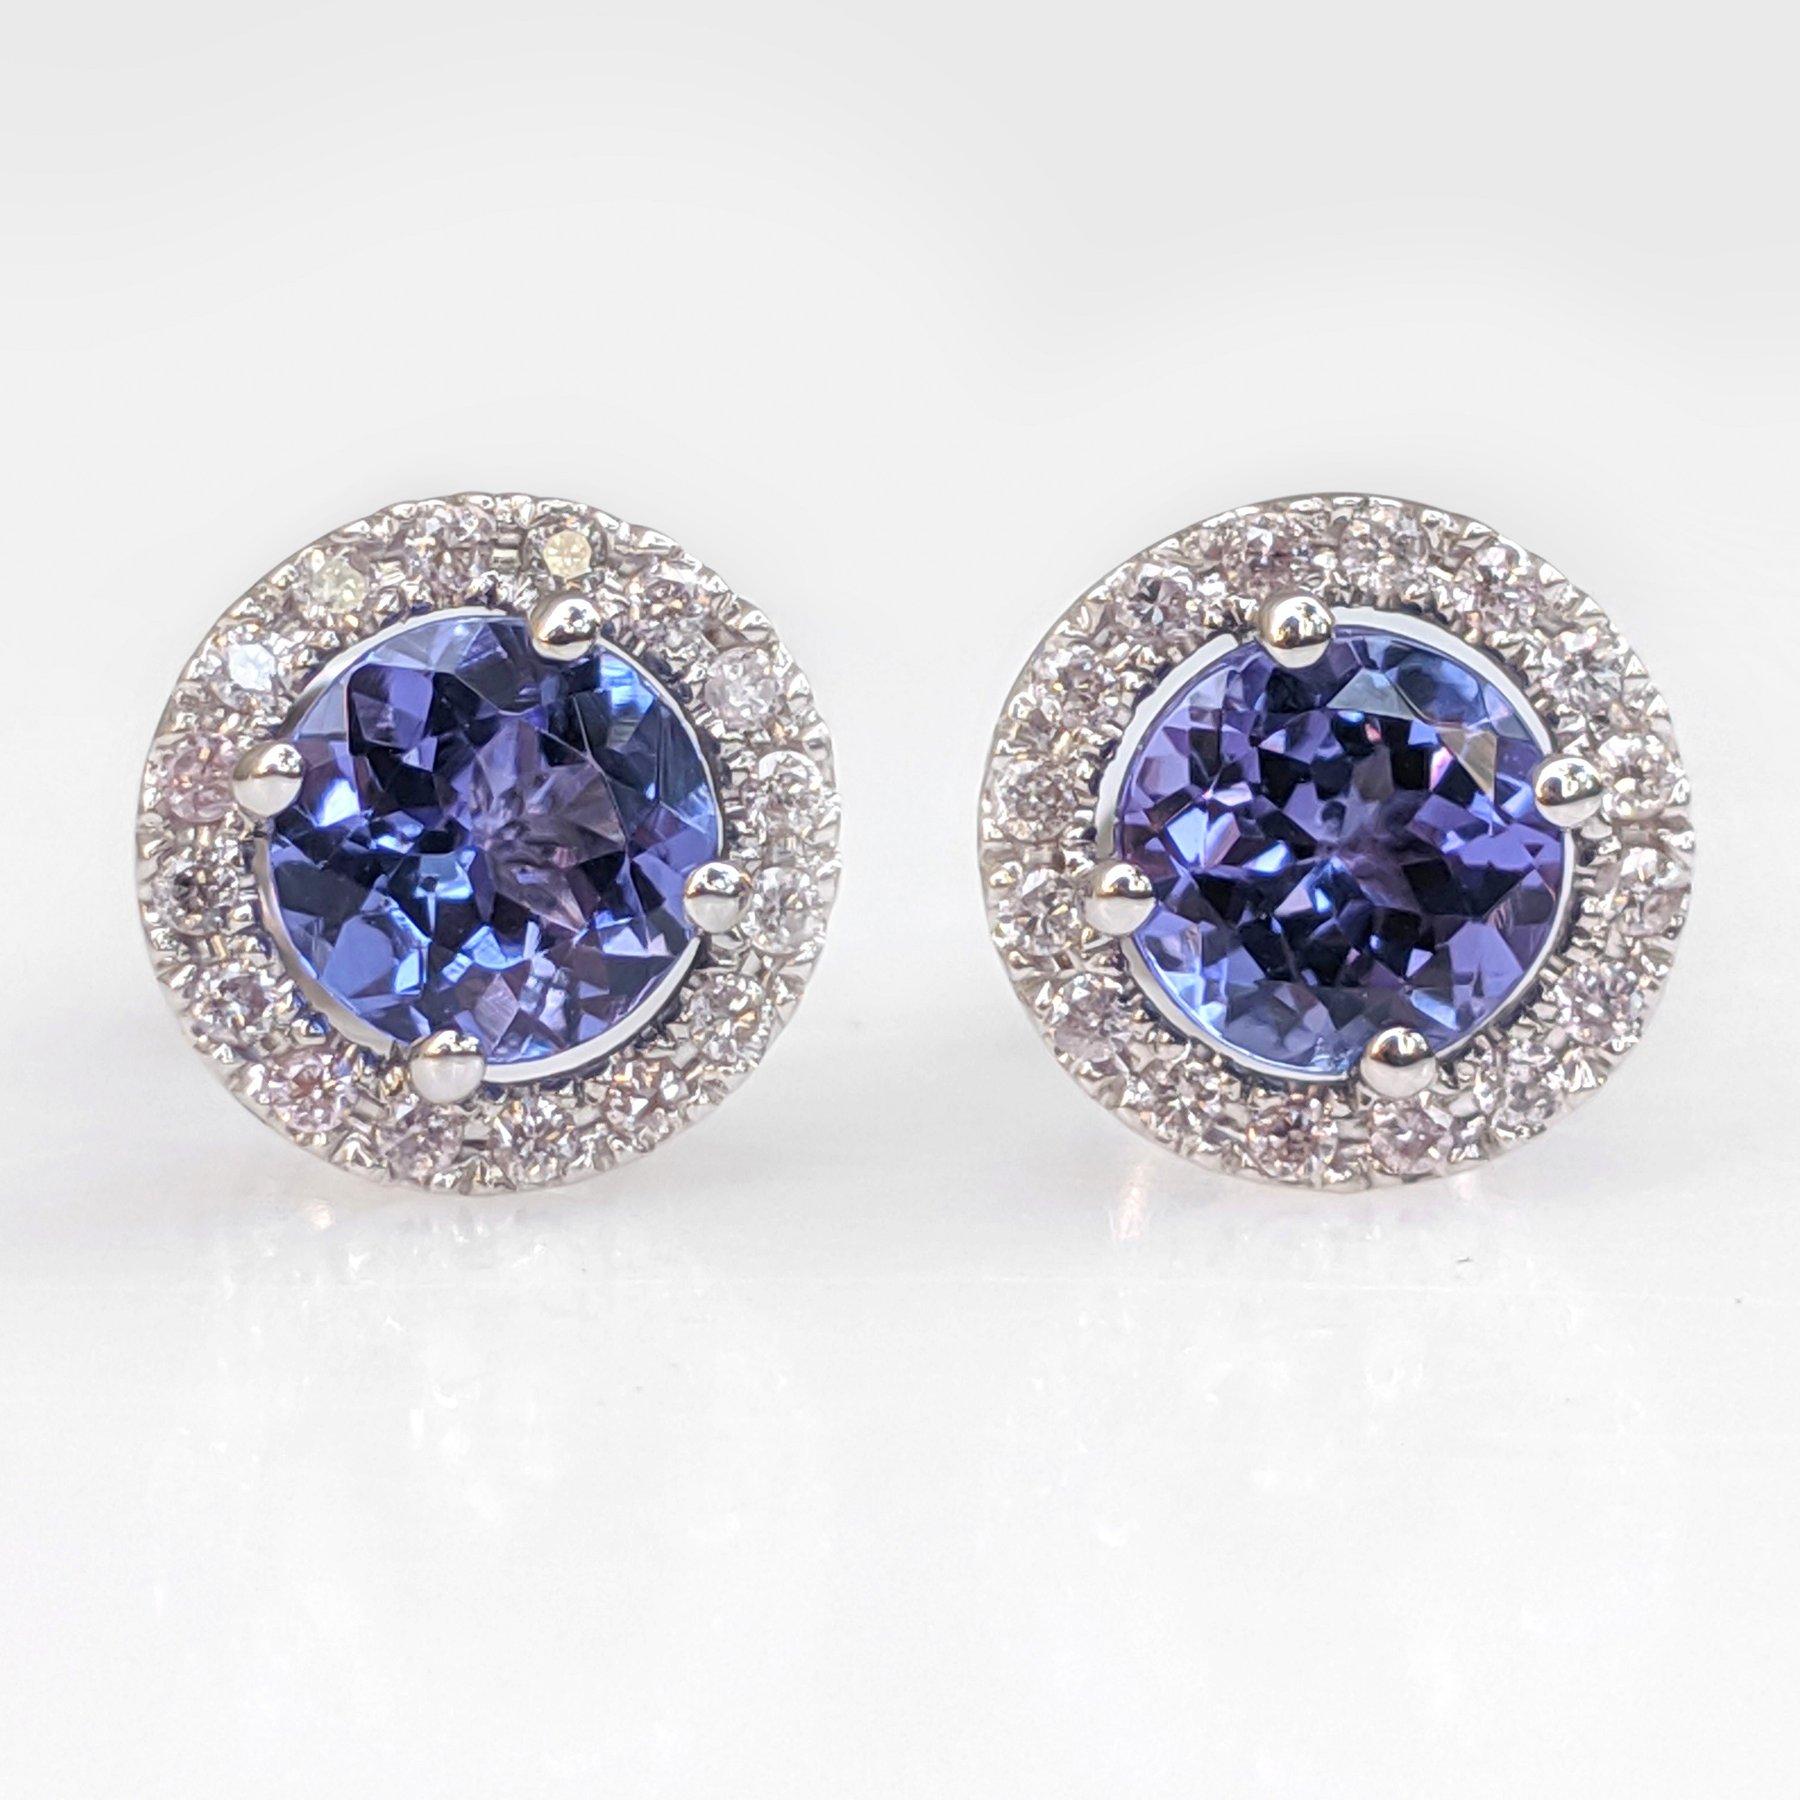 Art Deco NO RESERVE! 1.48Ct Tanzanite & 0.25Ct Pink Diamonds 14 kt. White gold Earrings For Sale